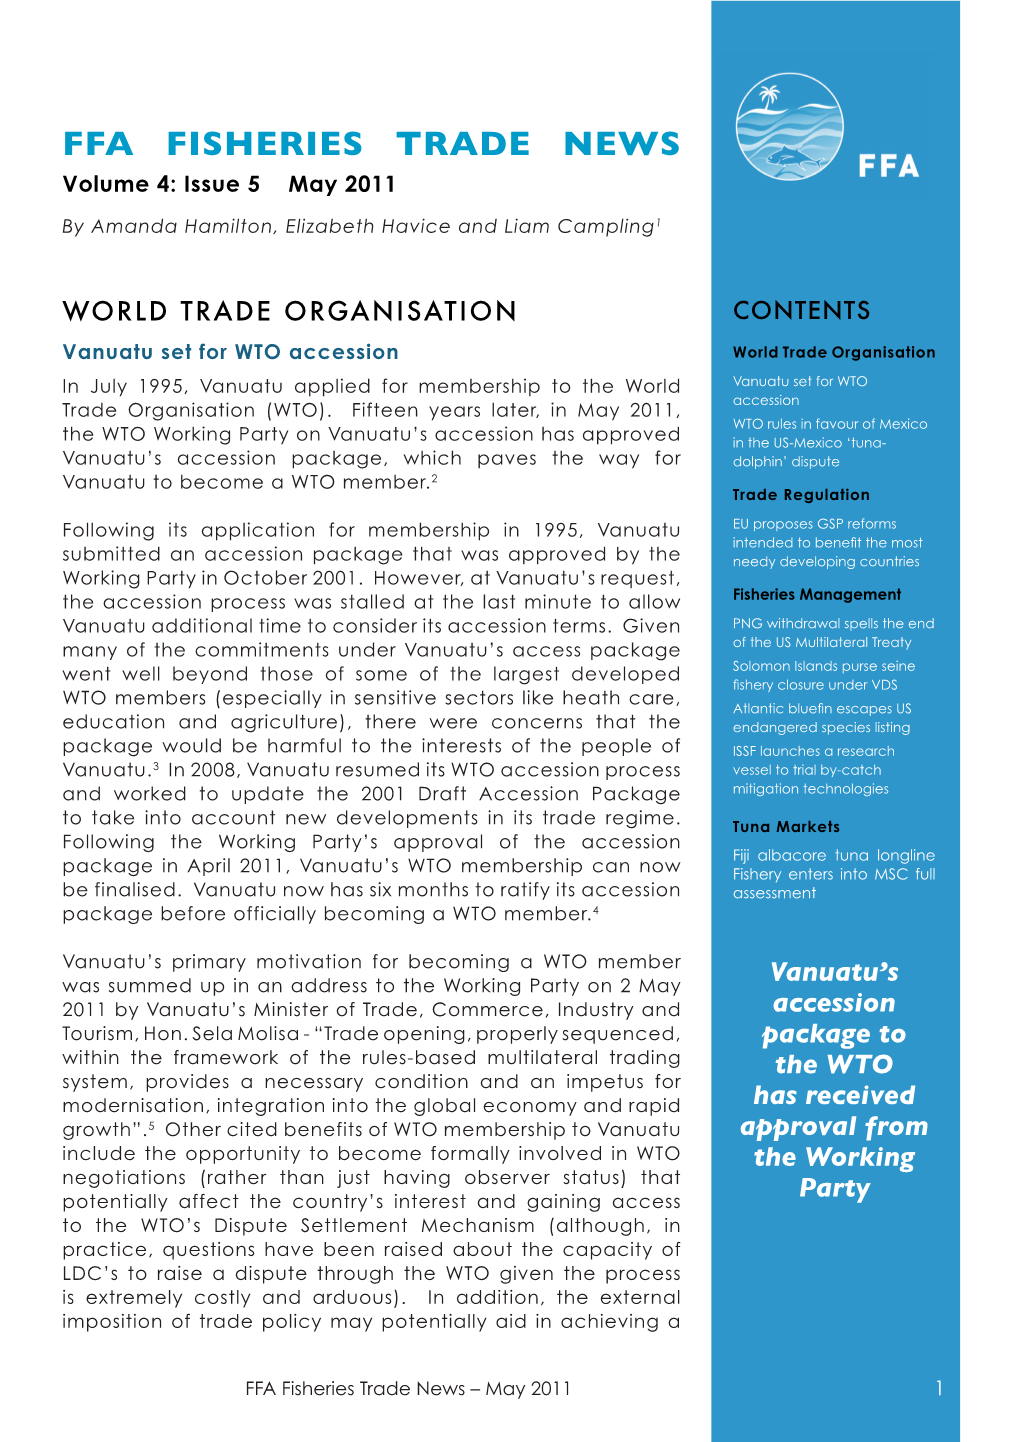 FFA FISHERIES TRADE NEWS Volume 4: Issue 5 May 2011